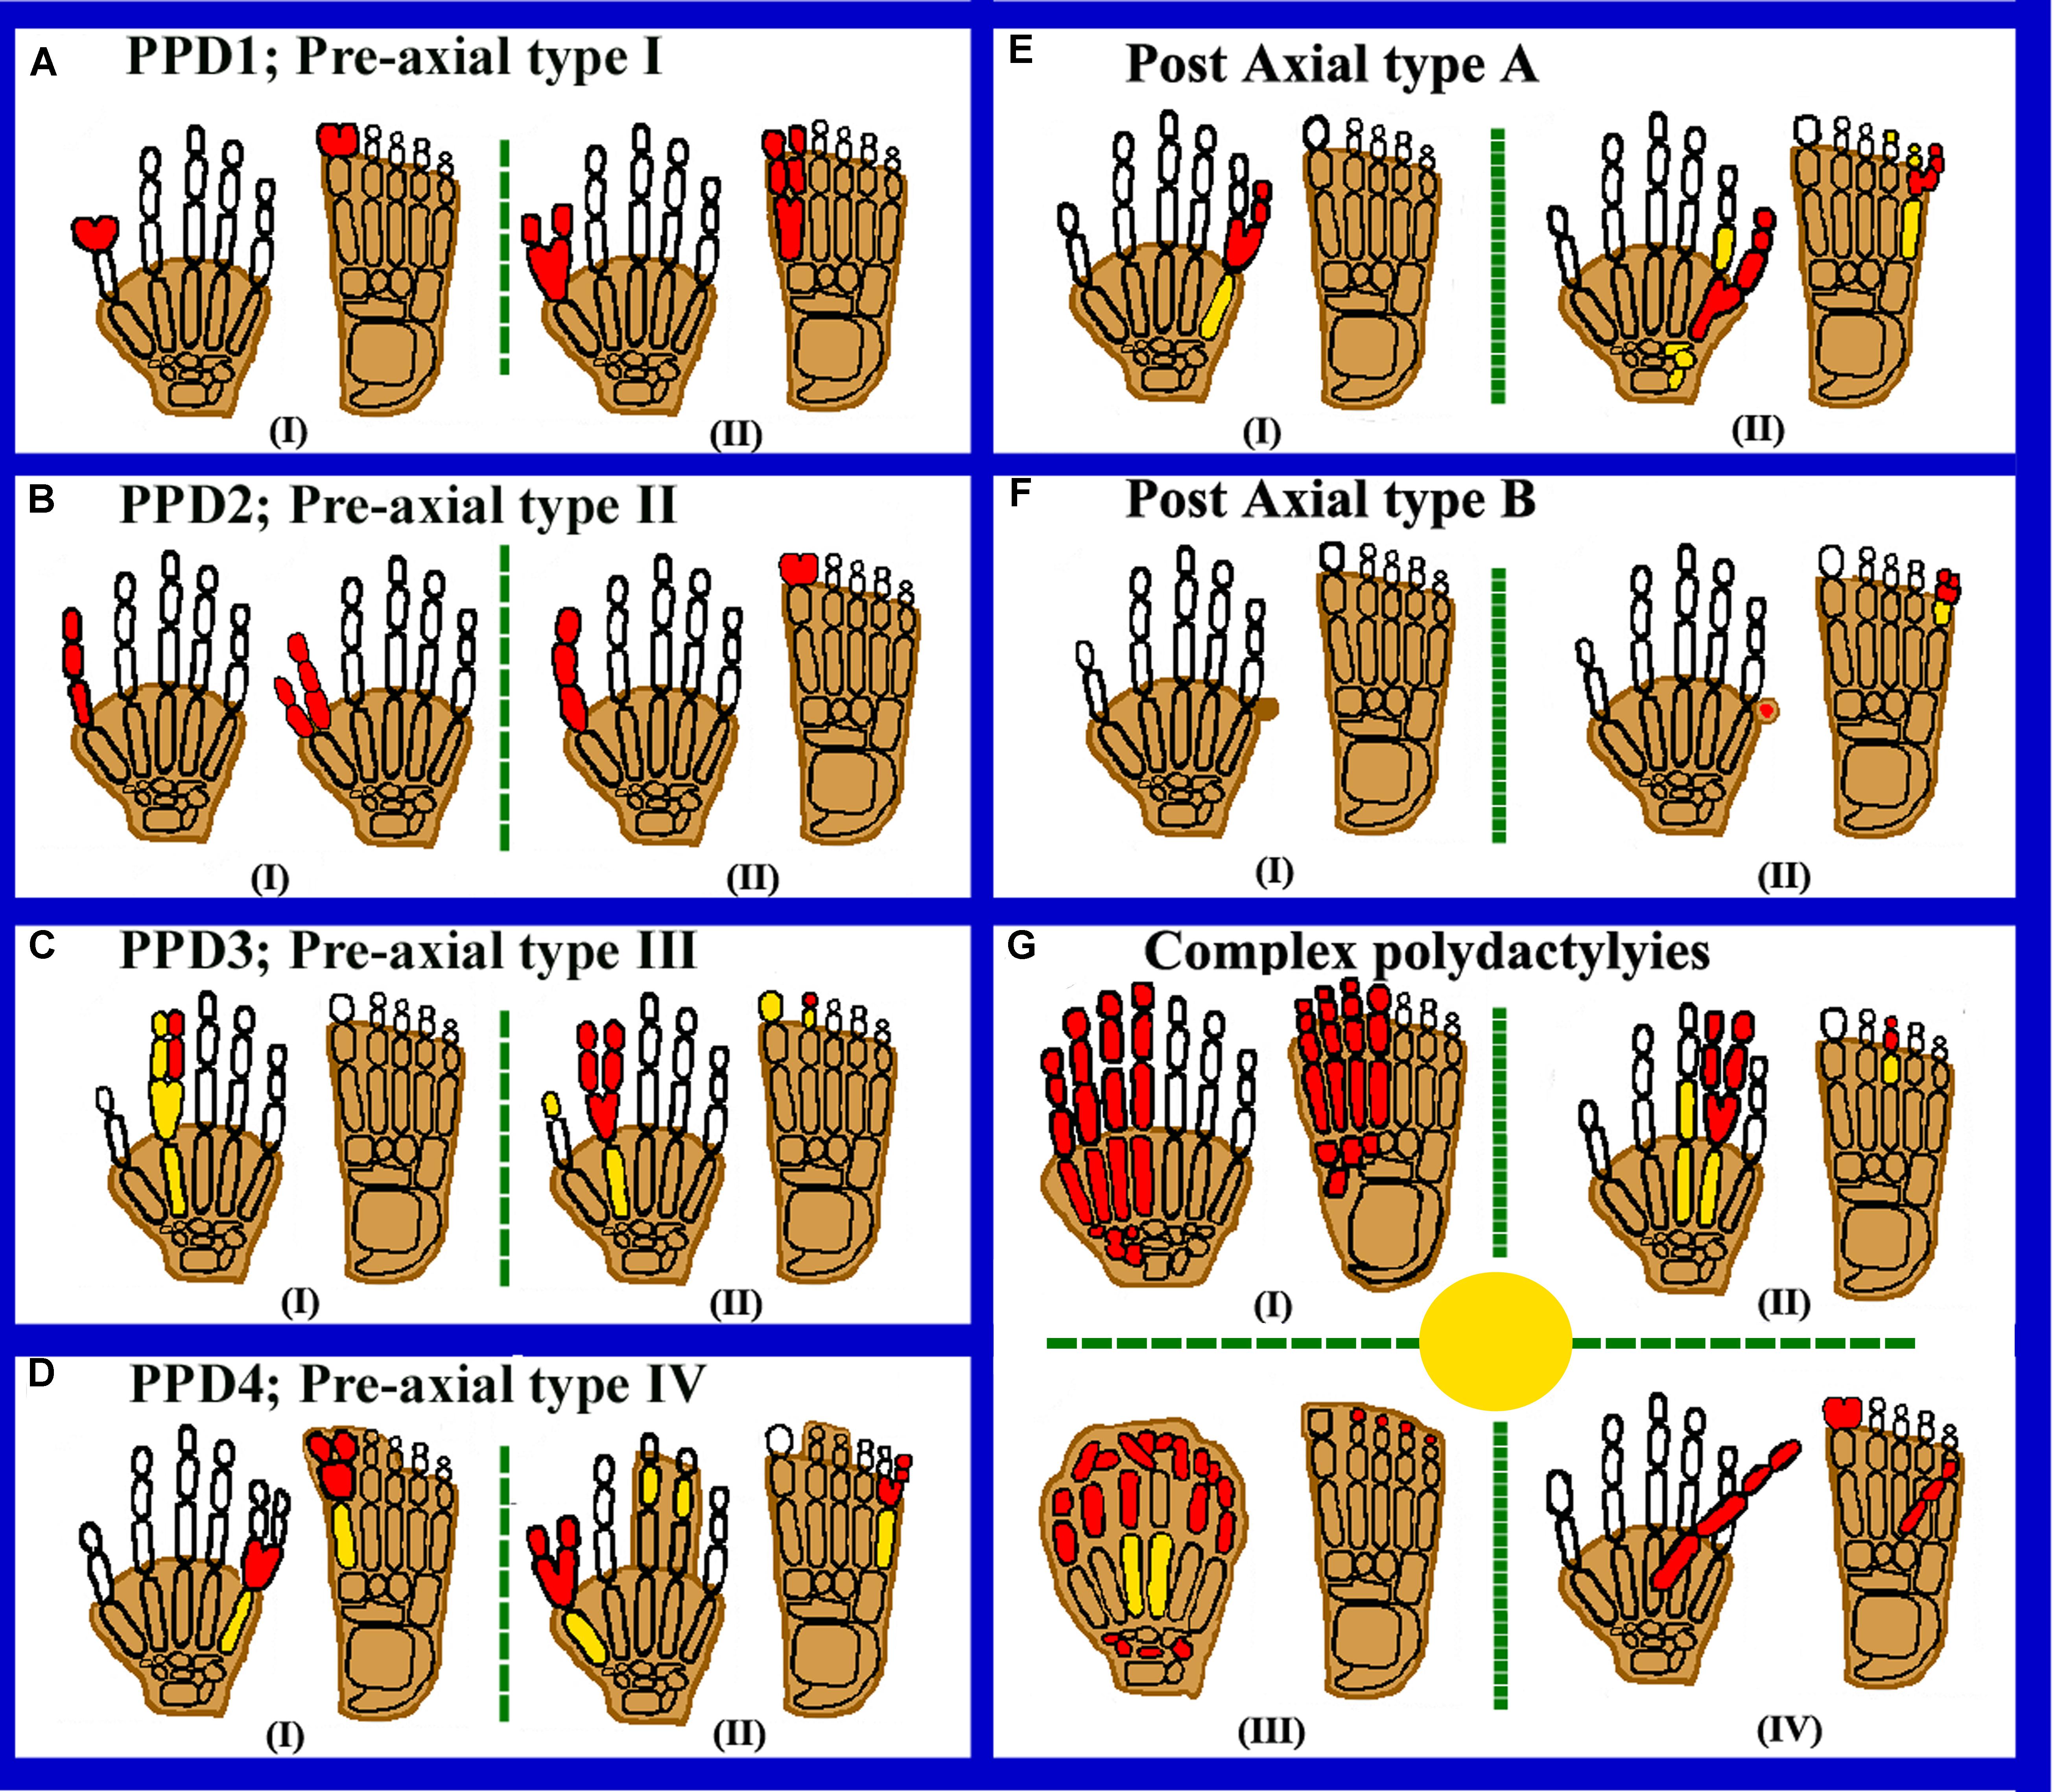 Frontiers | Clinical Genetics of Polydactyly: An Updated Review